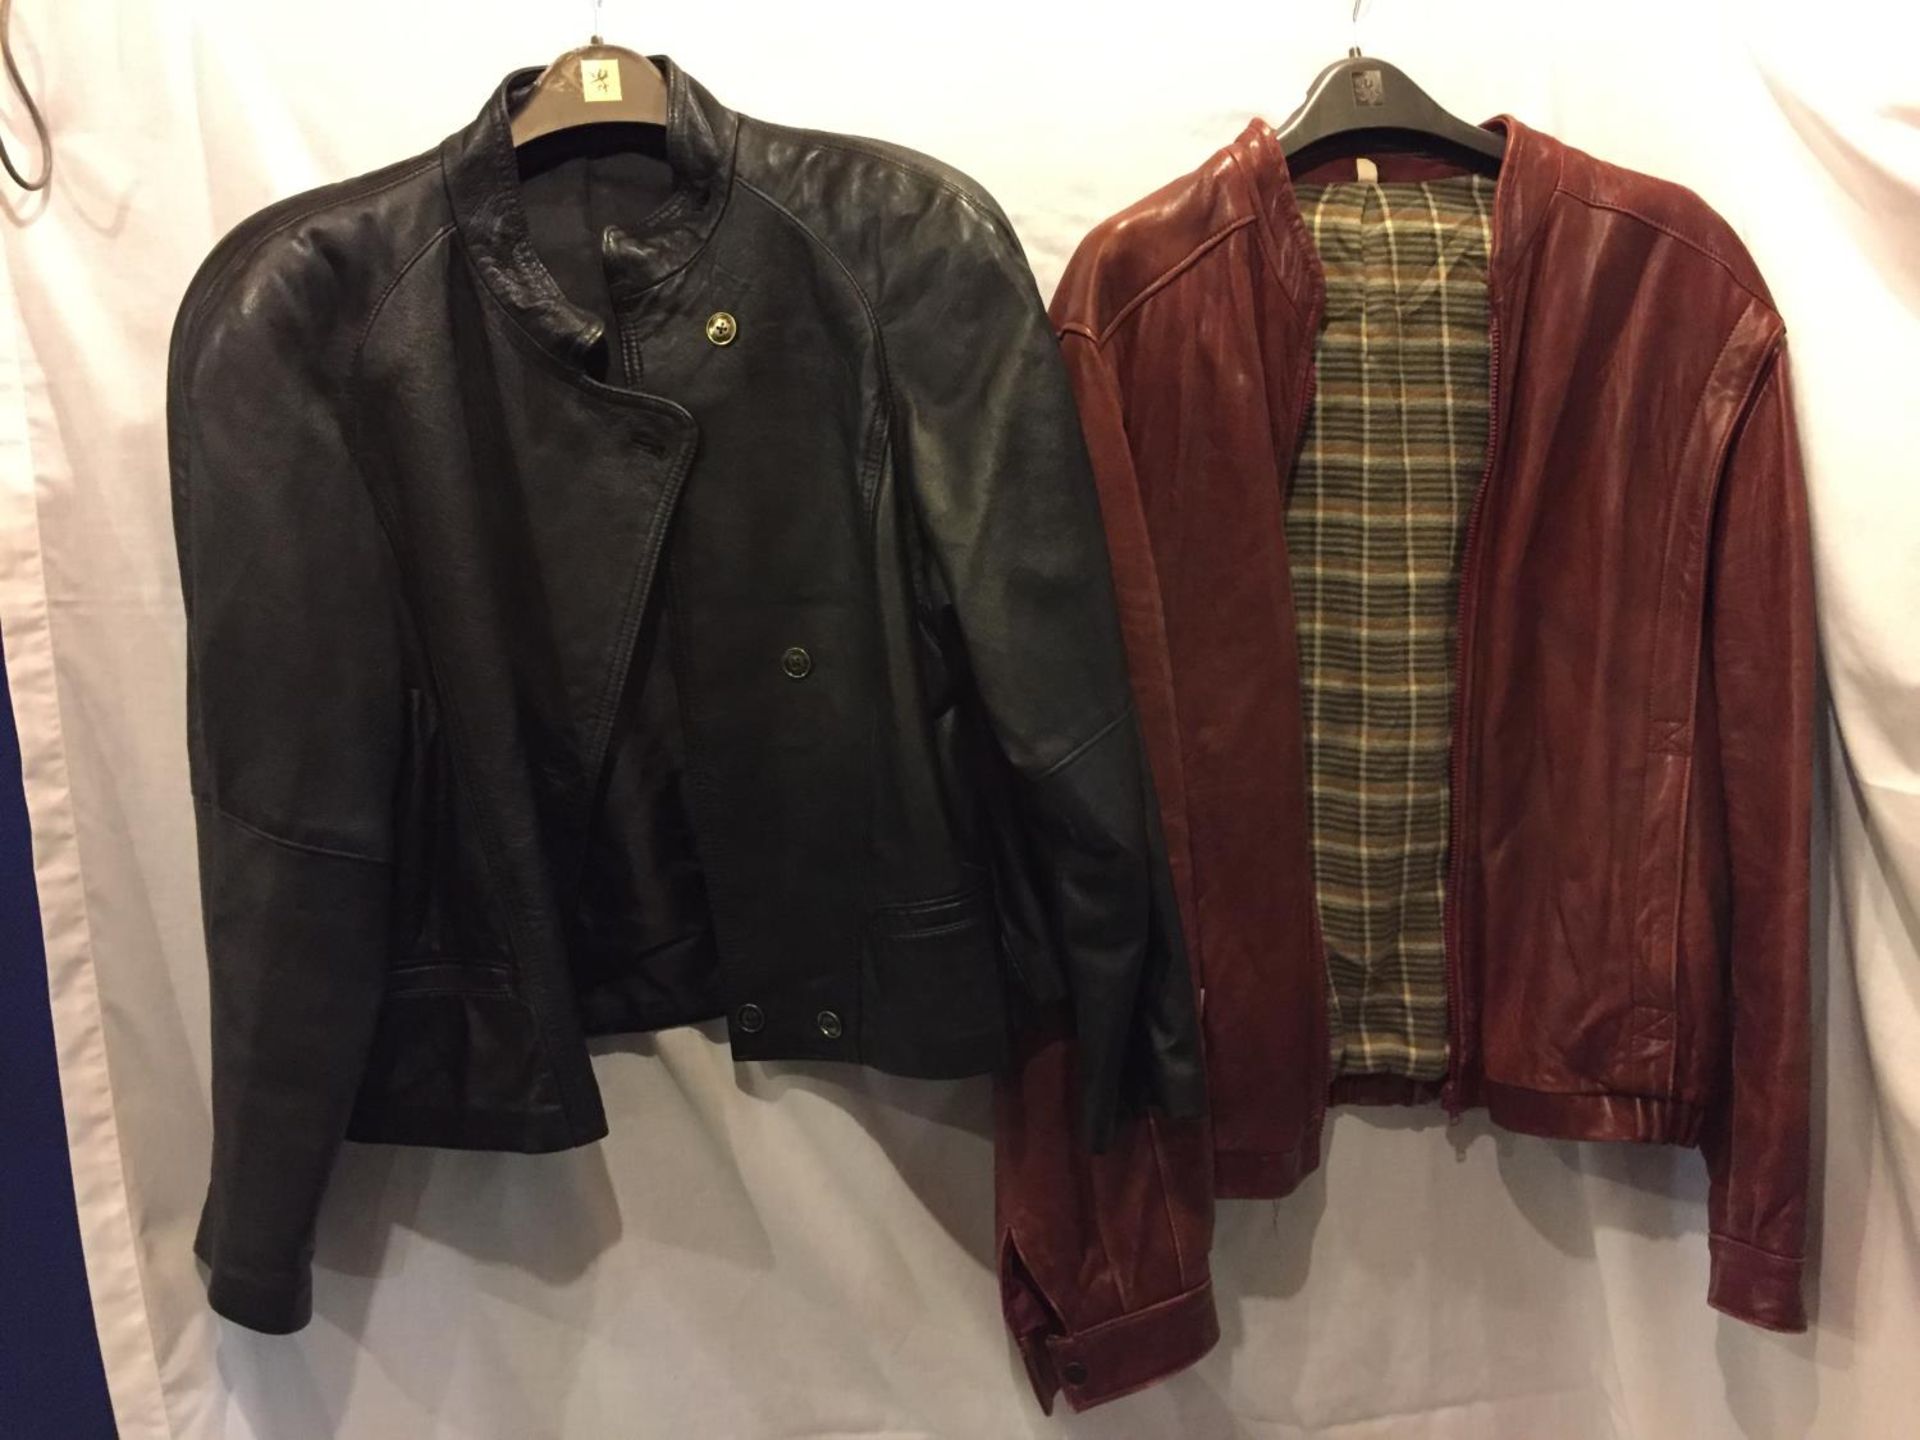 TWO LEATHER JACKETS, ONE BLACK AND ONE RED